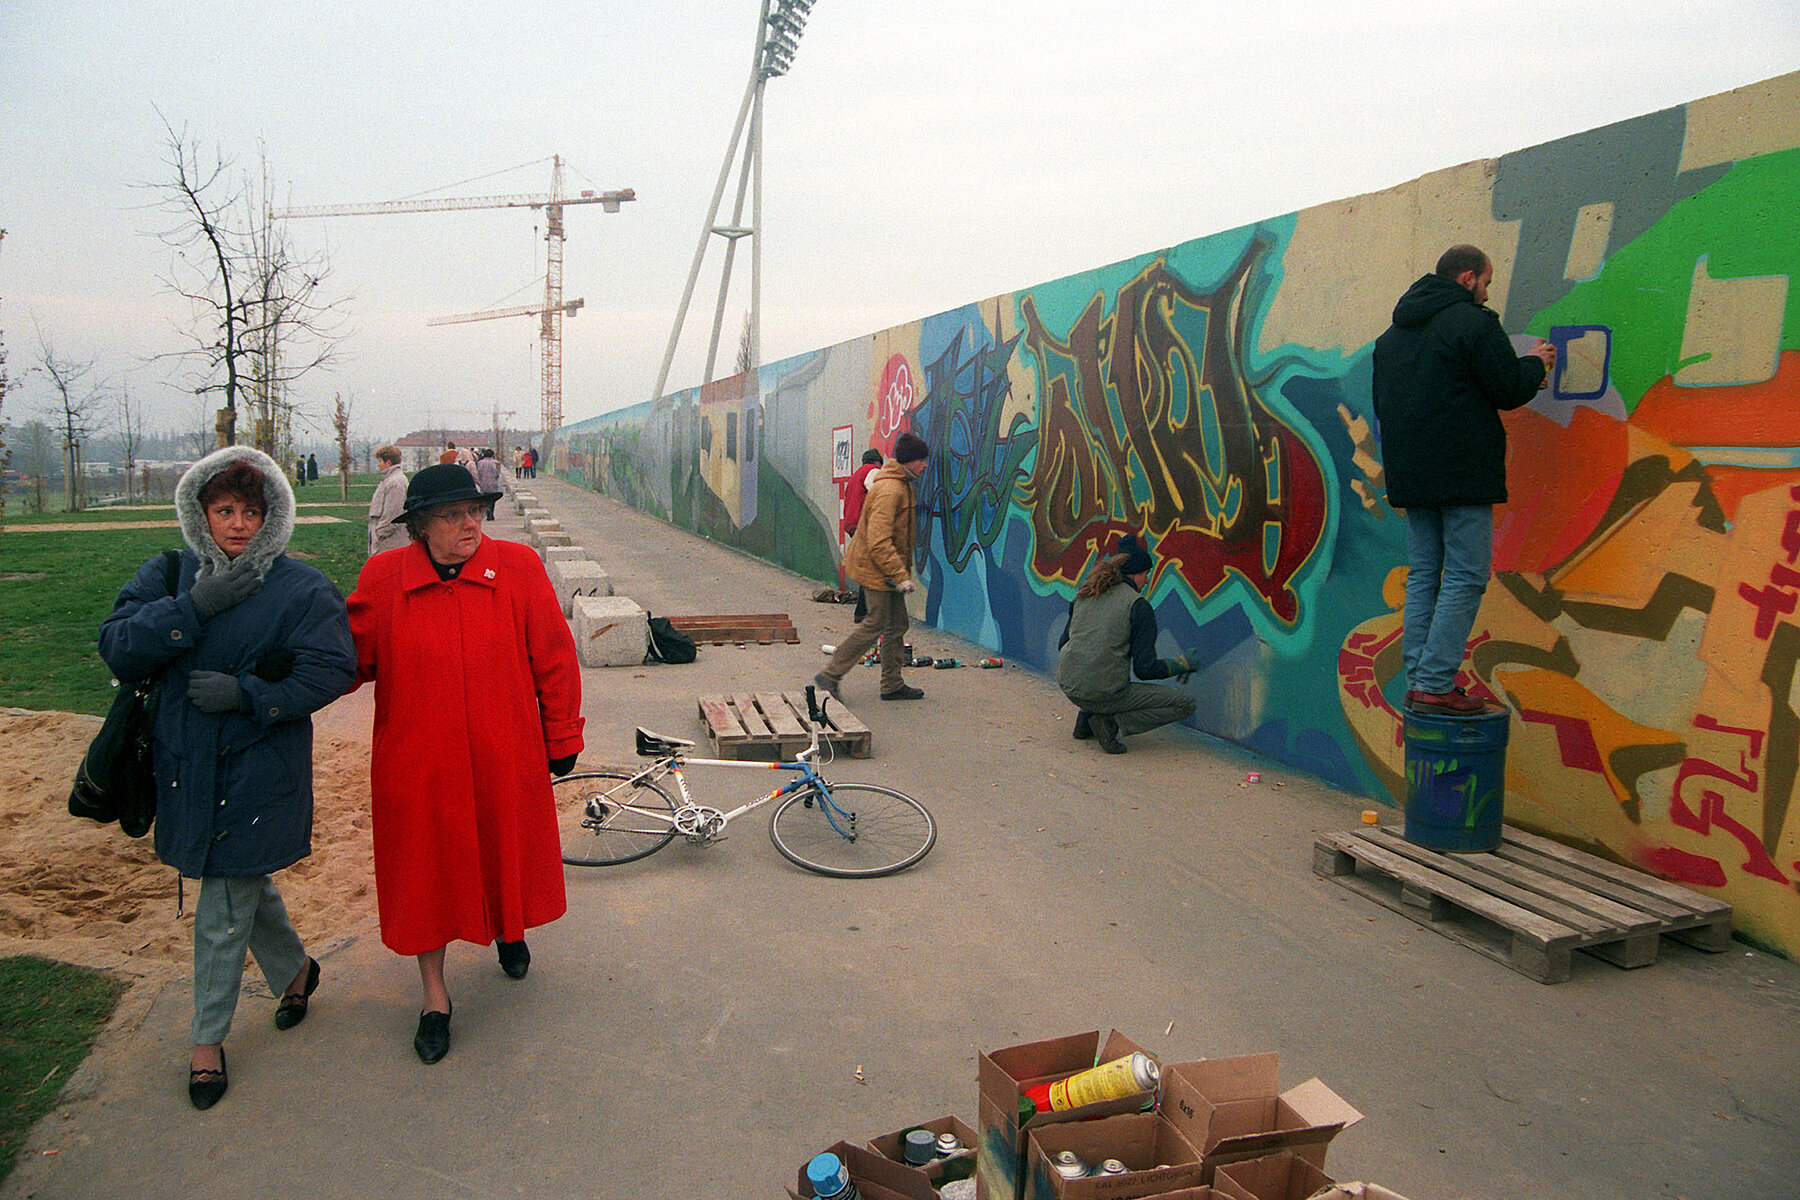 Sprayers paint the Wall between Mauerpark and Jahnsportpark, while two women walk past them. Construction cranes can be seen in the background.